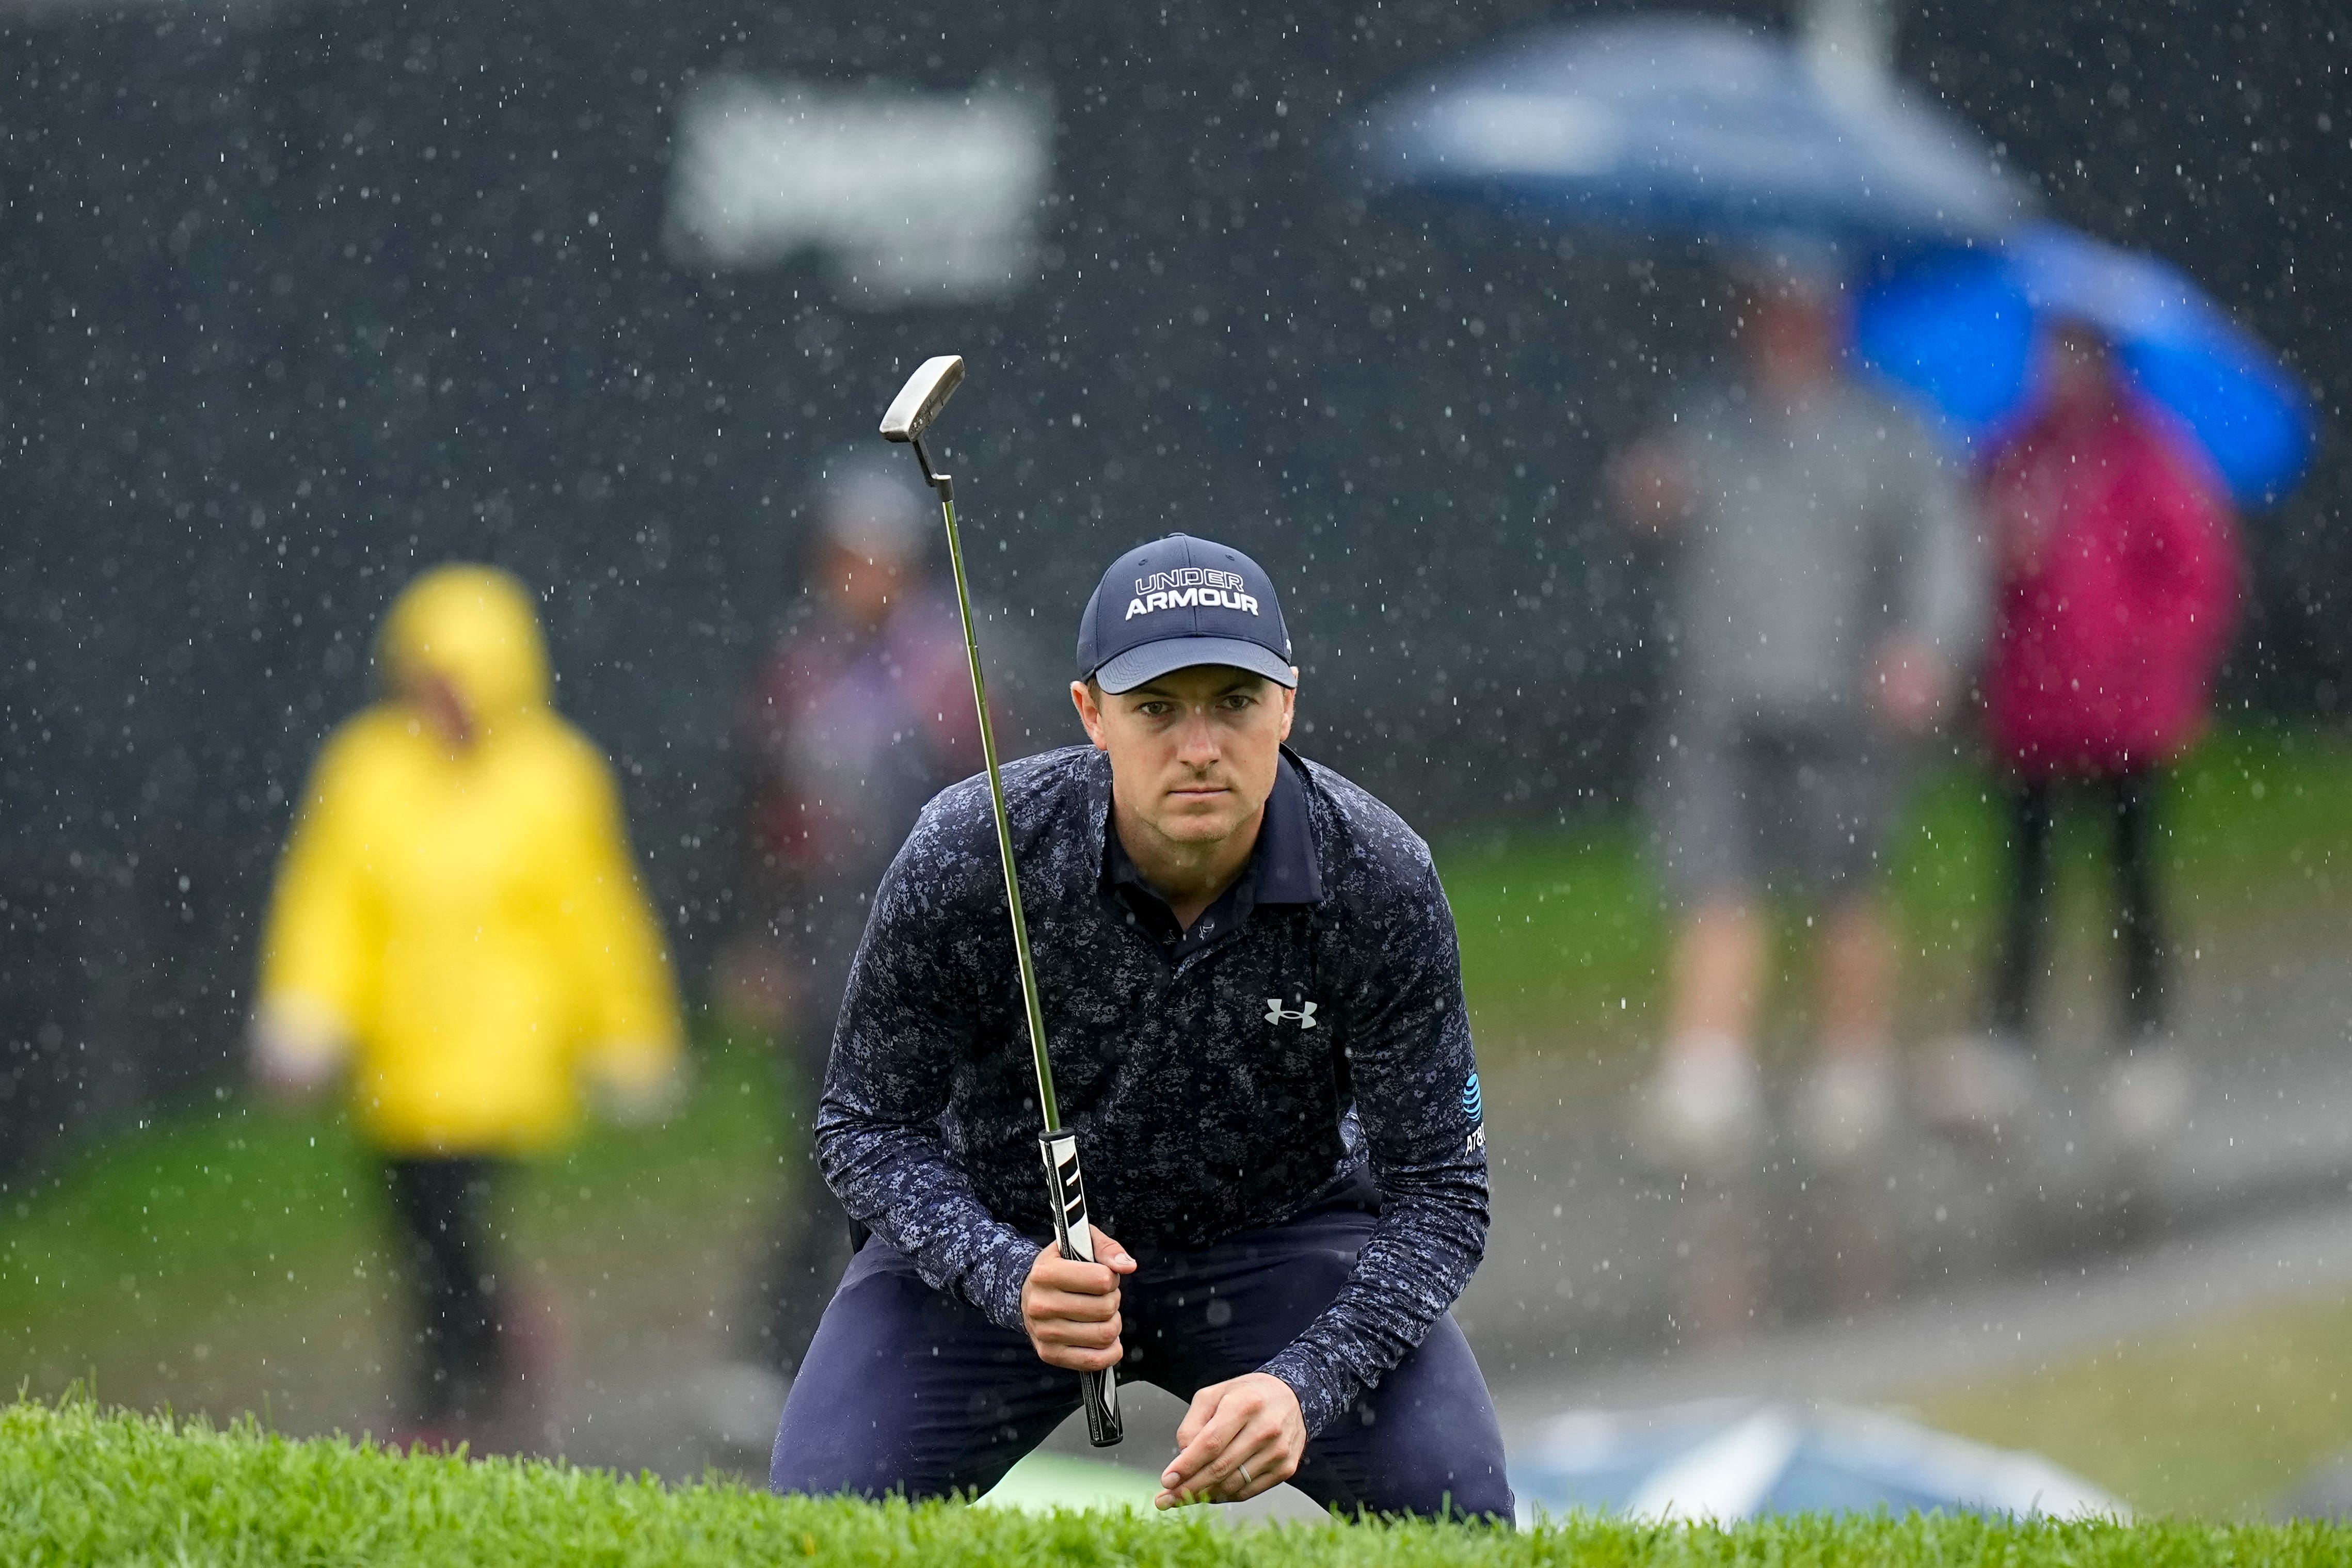 Jordan Spieth lines up a putt in the rain on the 18th hole during the third round of the US PGA Championship (Eric Gay/AP)